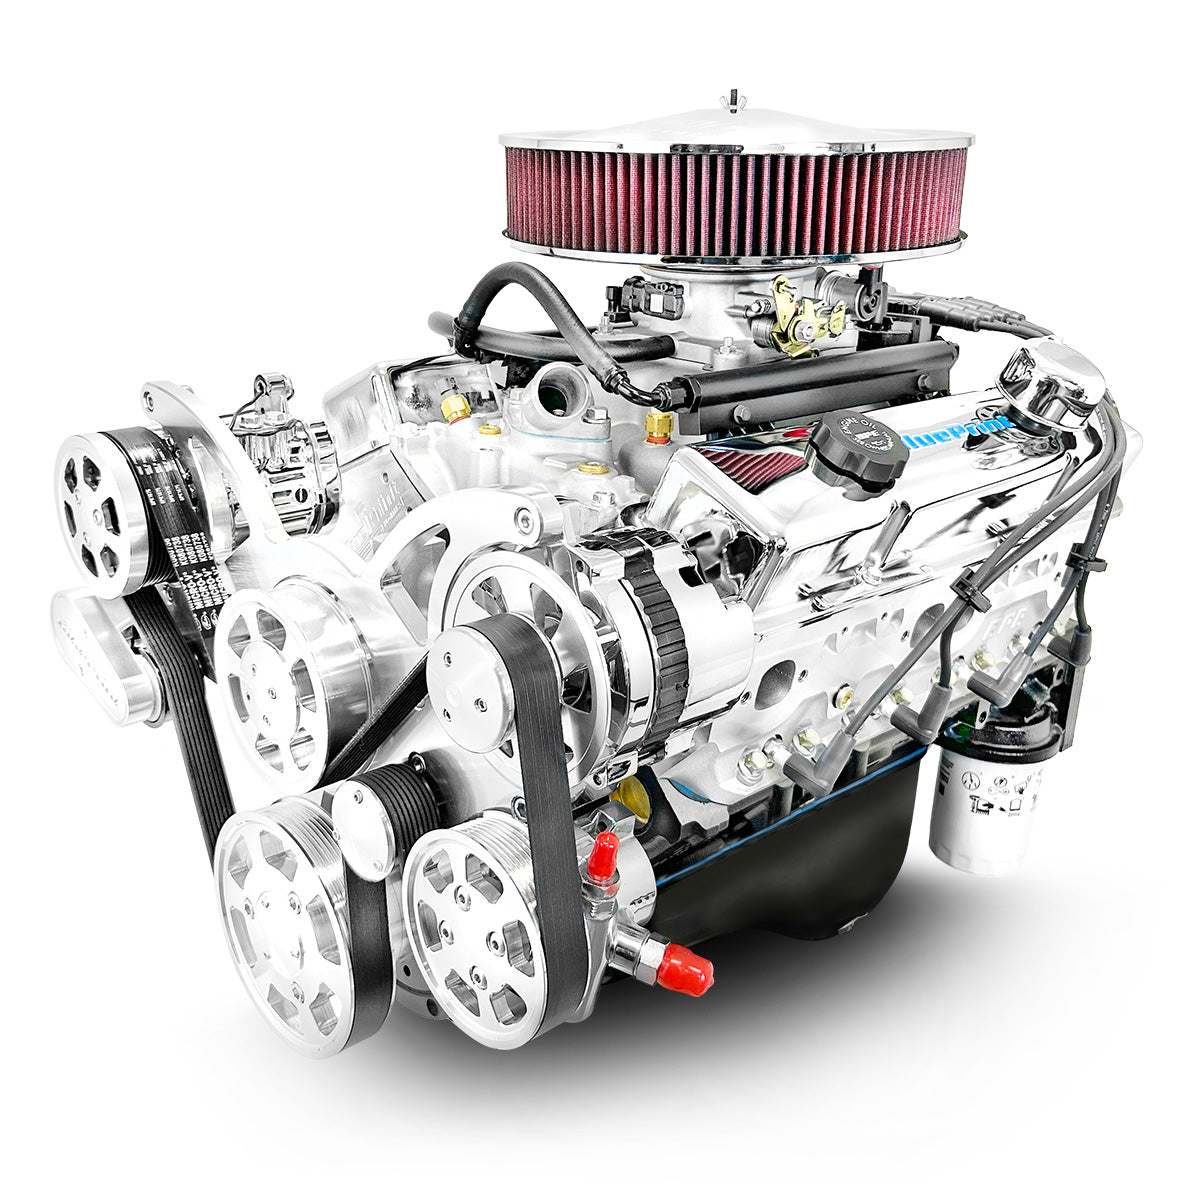 GM SB Compatible 383 c.i. Engine - 436 HP - Deluxe Dressed with